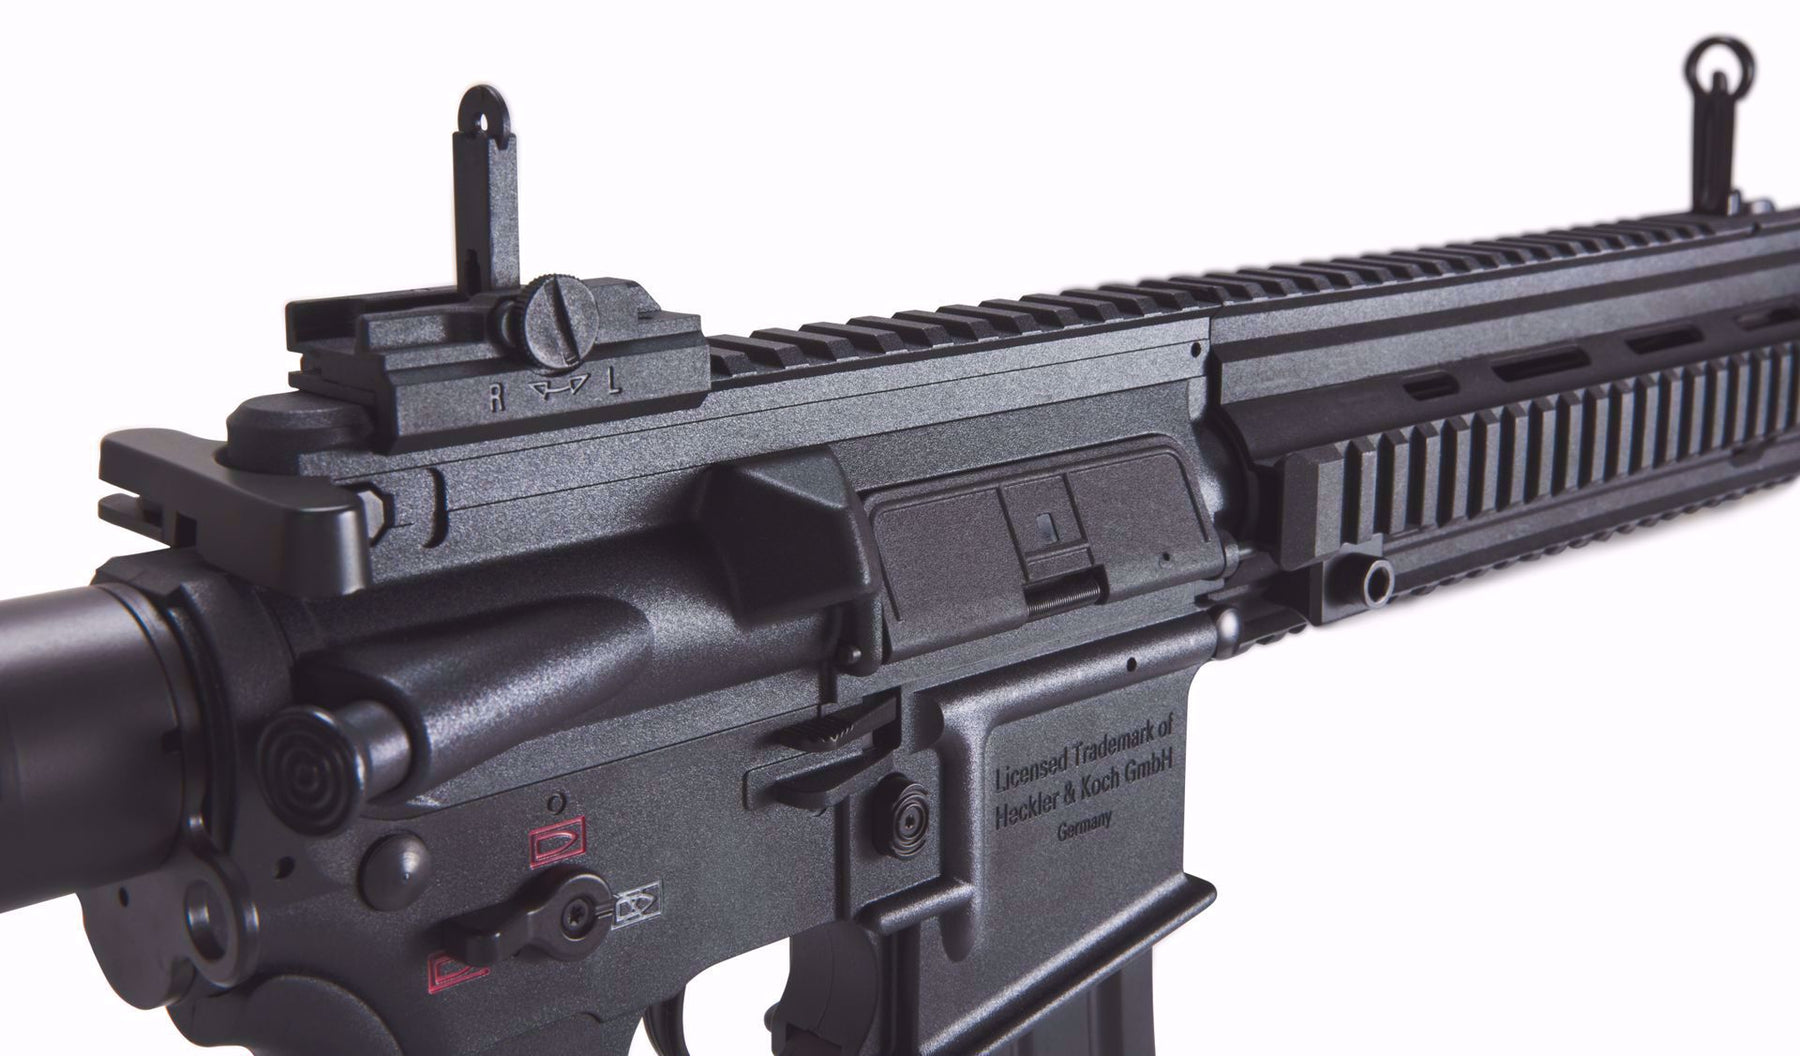 Hk 416 A5 Competition Airsoft Rifle - Black | Buy Umarex Airsoft Rifle